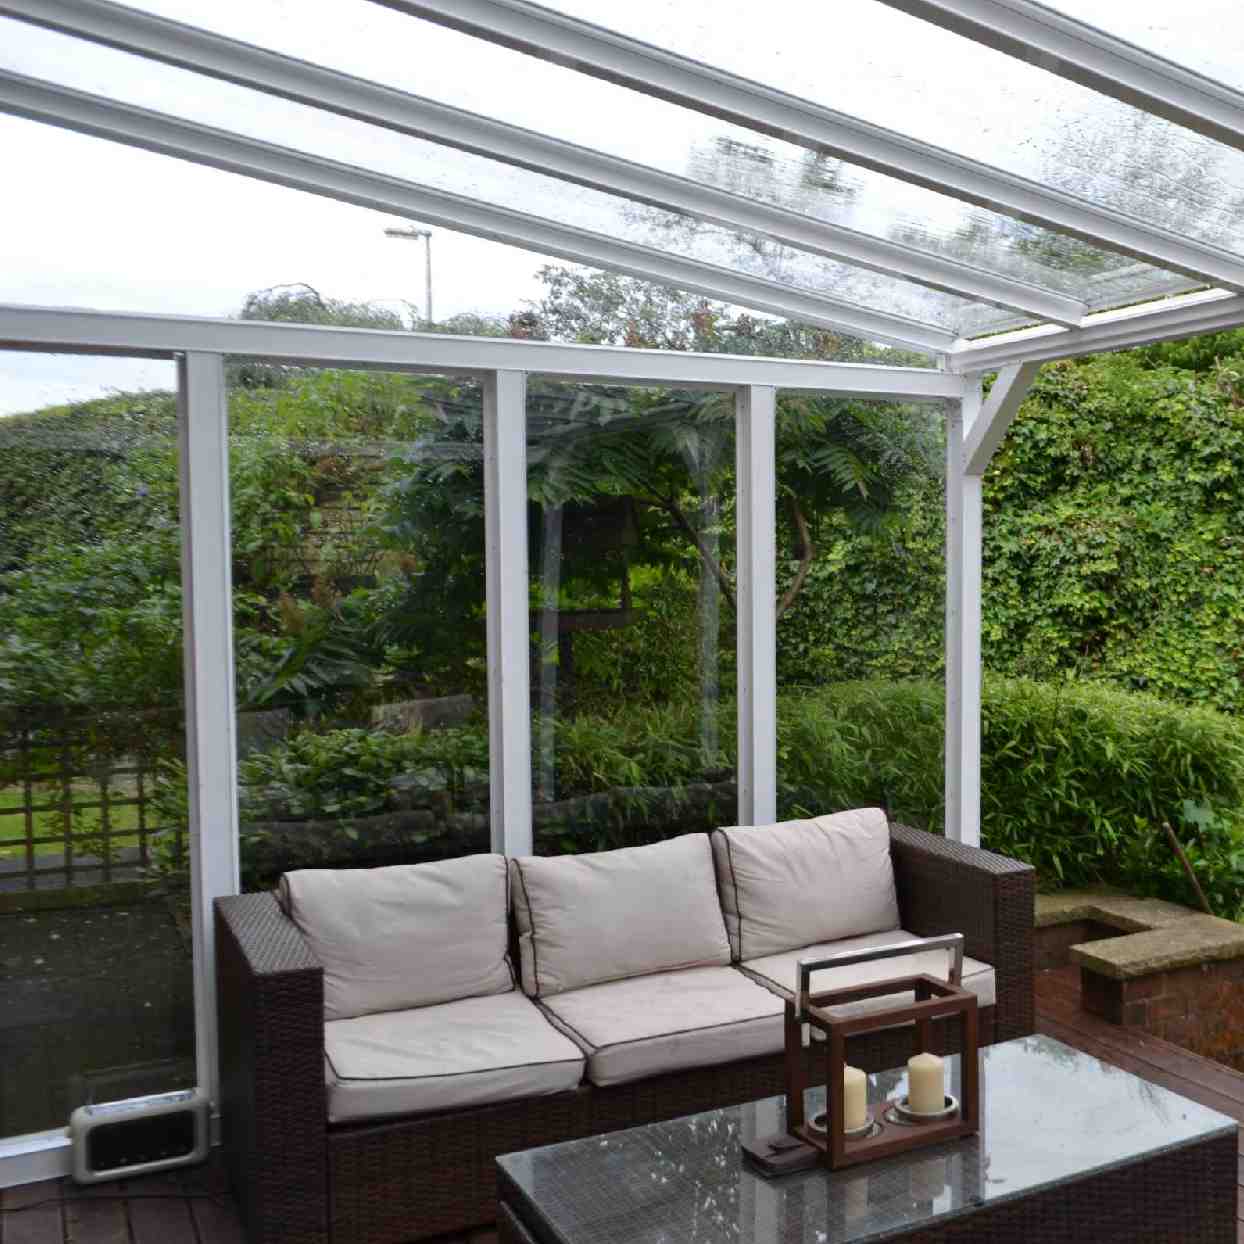 Buy Omega Verandah White with 6mm Glass Clear Plate Polycarbonate Glazing - 8.4m (W) x 2.5m (P), (4) Supporting Posts online today